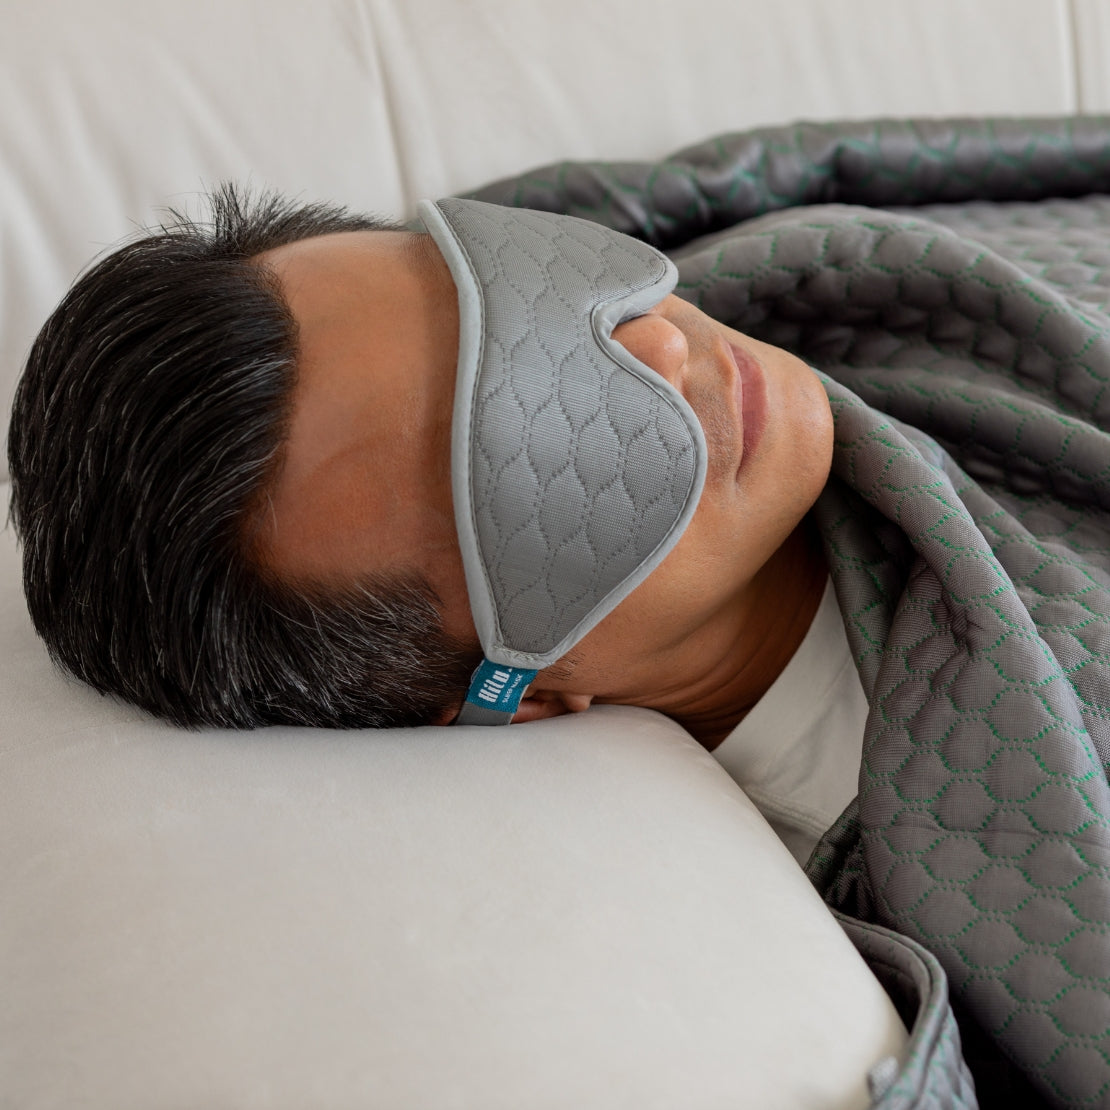 A person lying down comfortably with a textured grey HILU sleeping mask covering their eyes, complemented by a quilted green blanket.